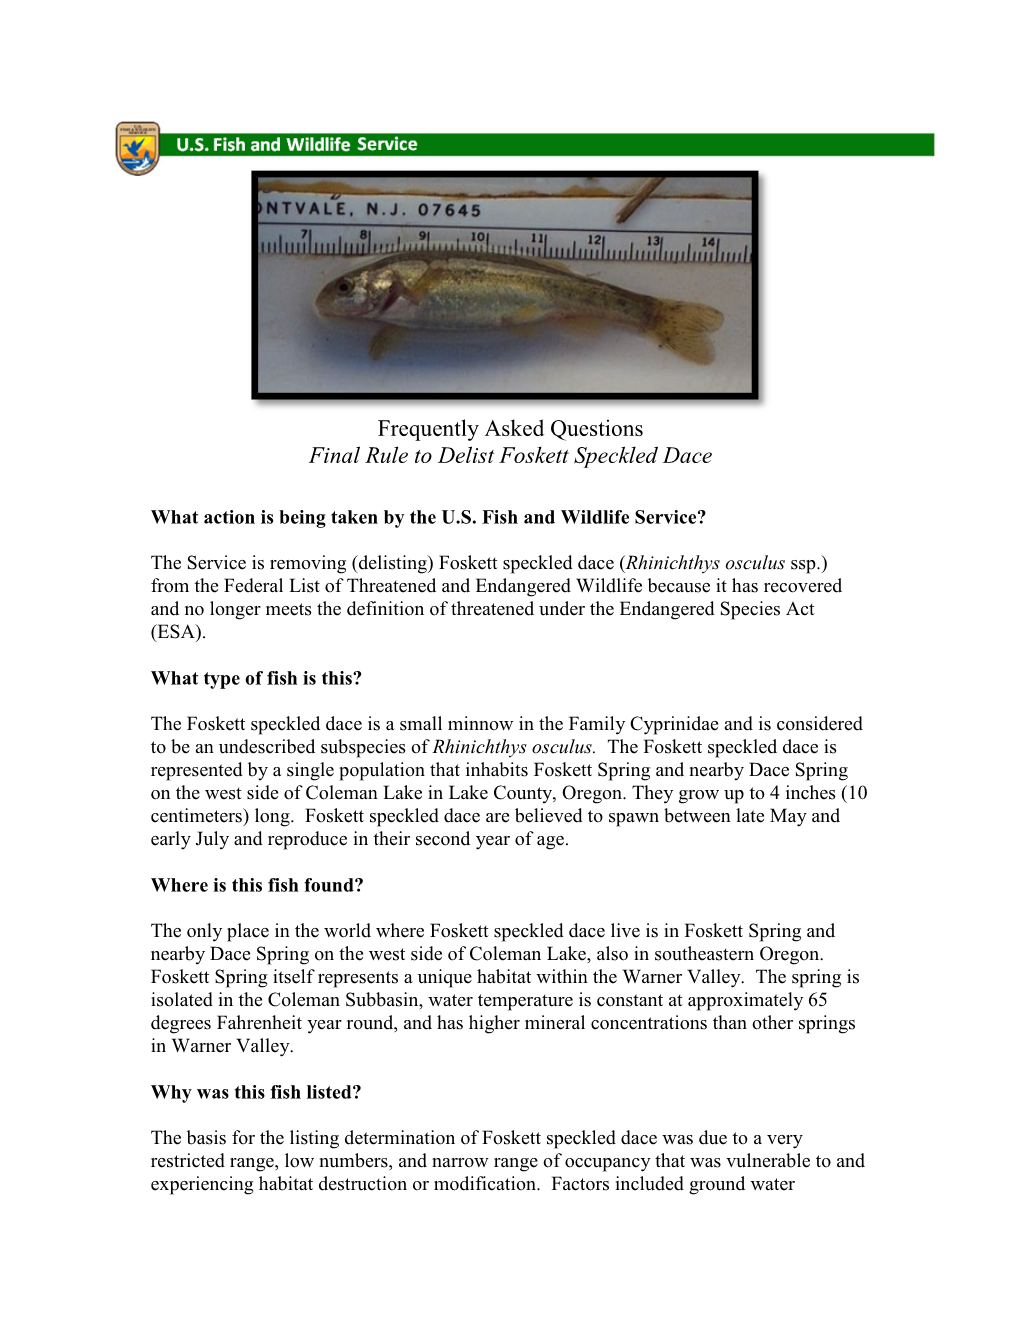 Frequently Asked Questions Final Rule to Delist Foskett Speckled Dace